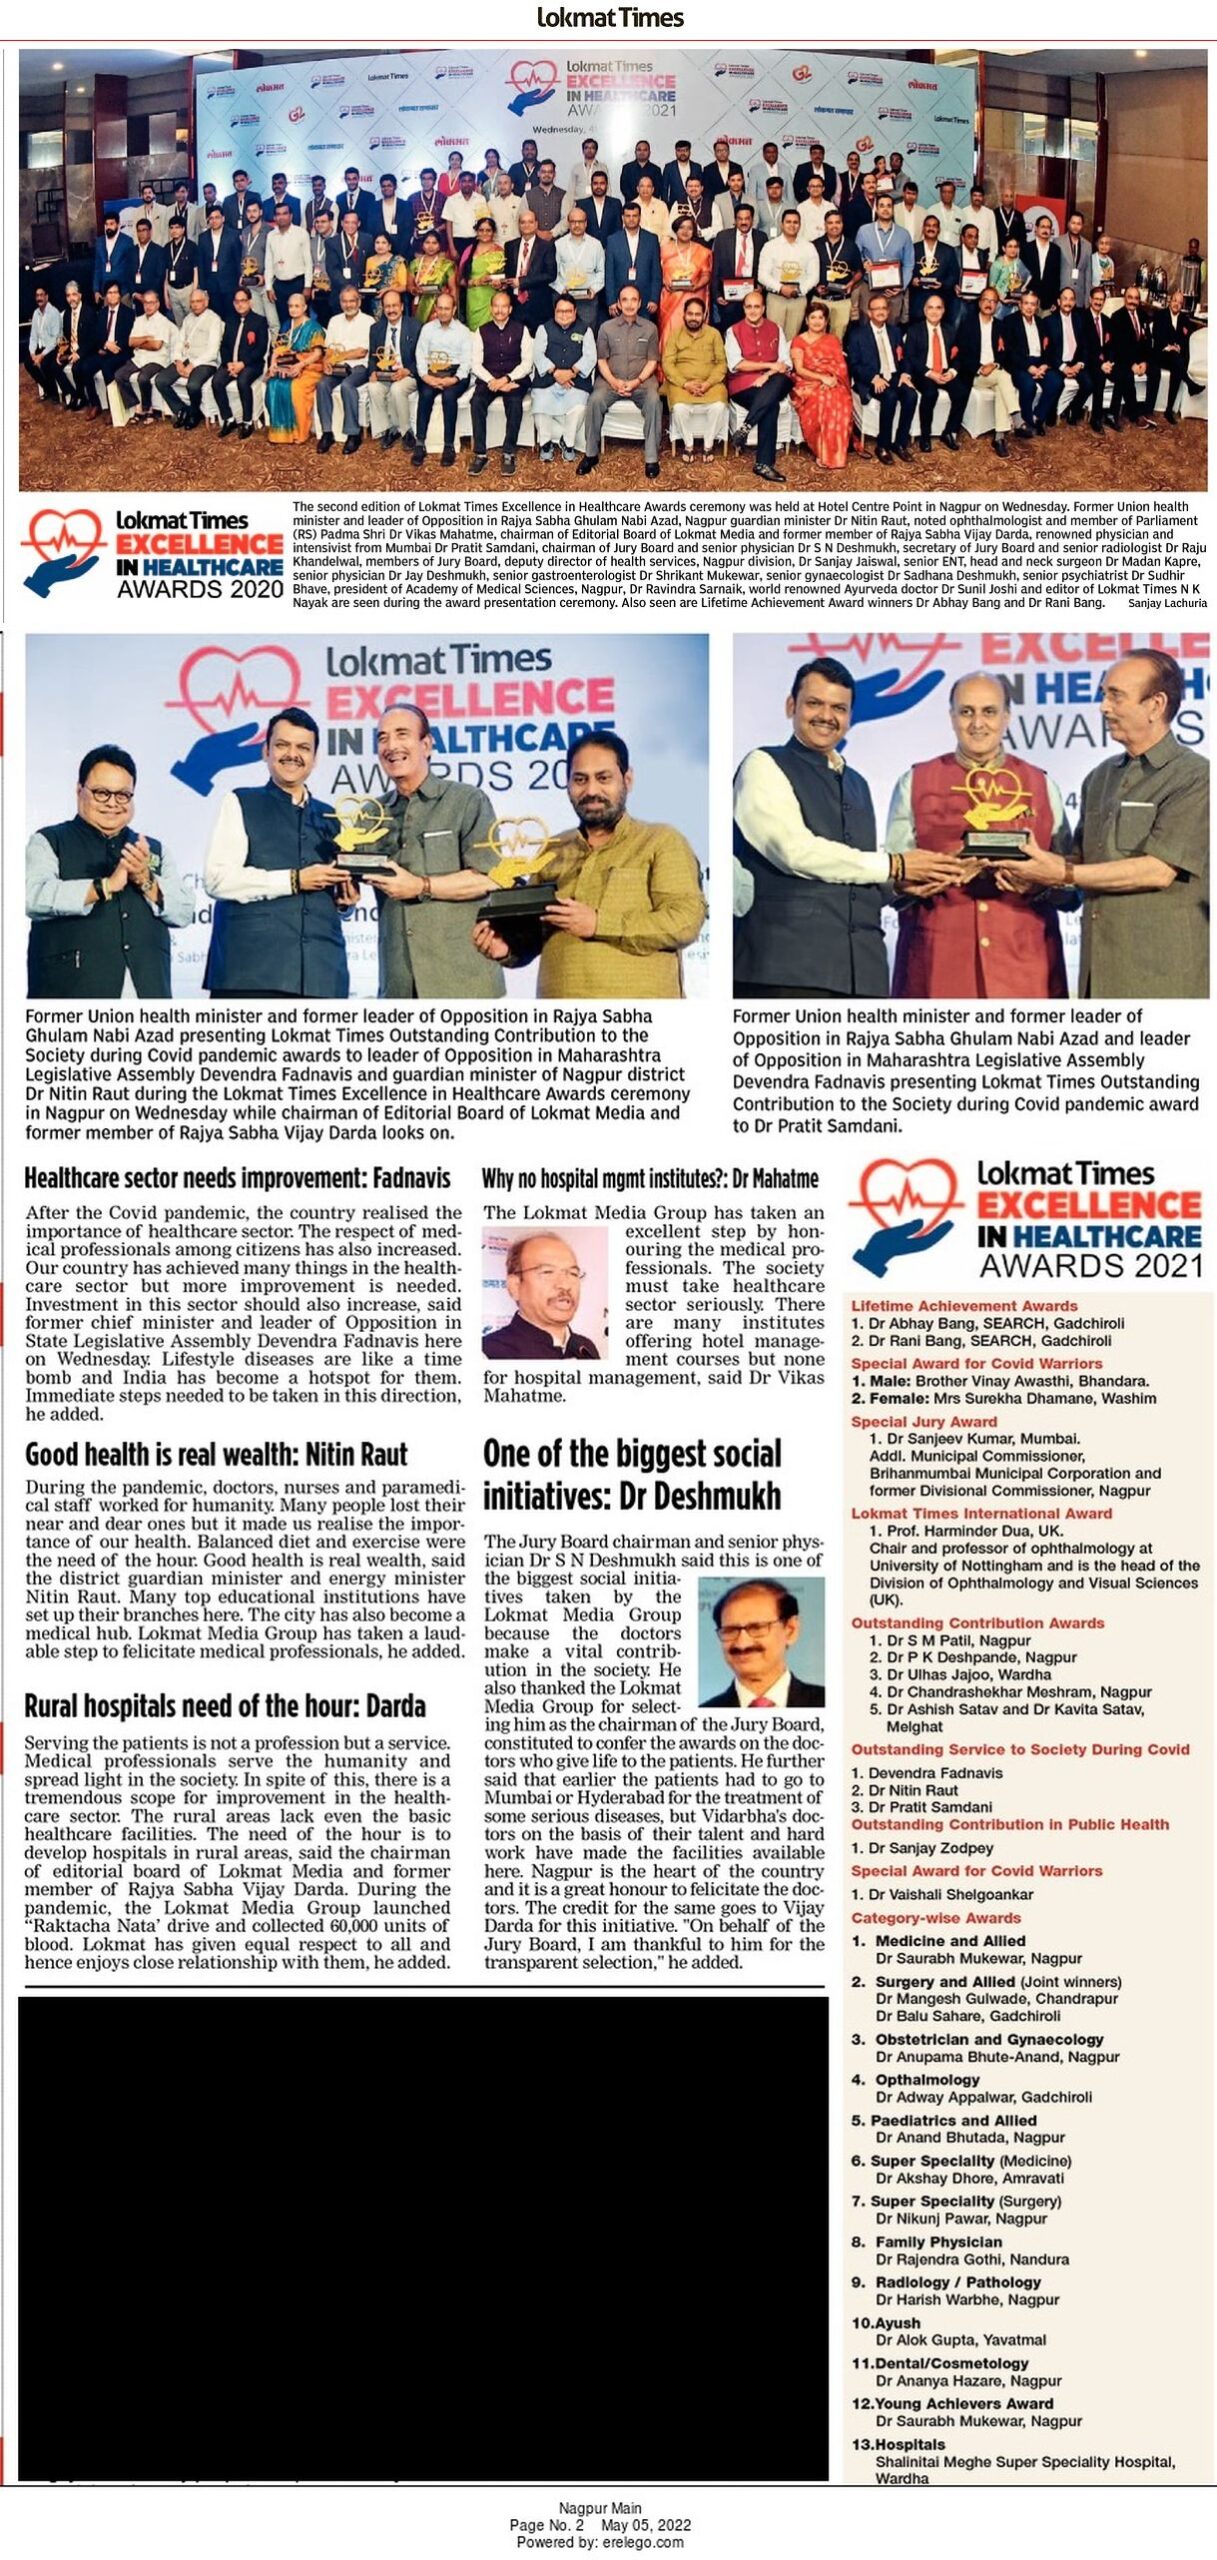 Lokmat Times Outstanding Contribution to the Society during Covid pandemic awards